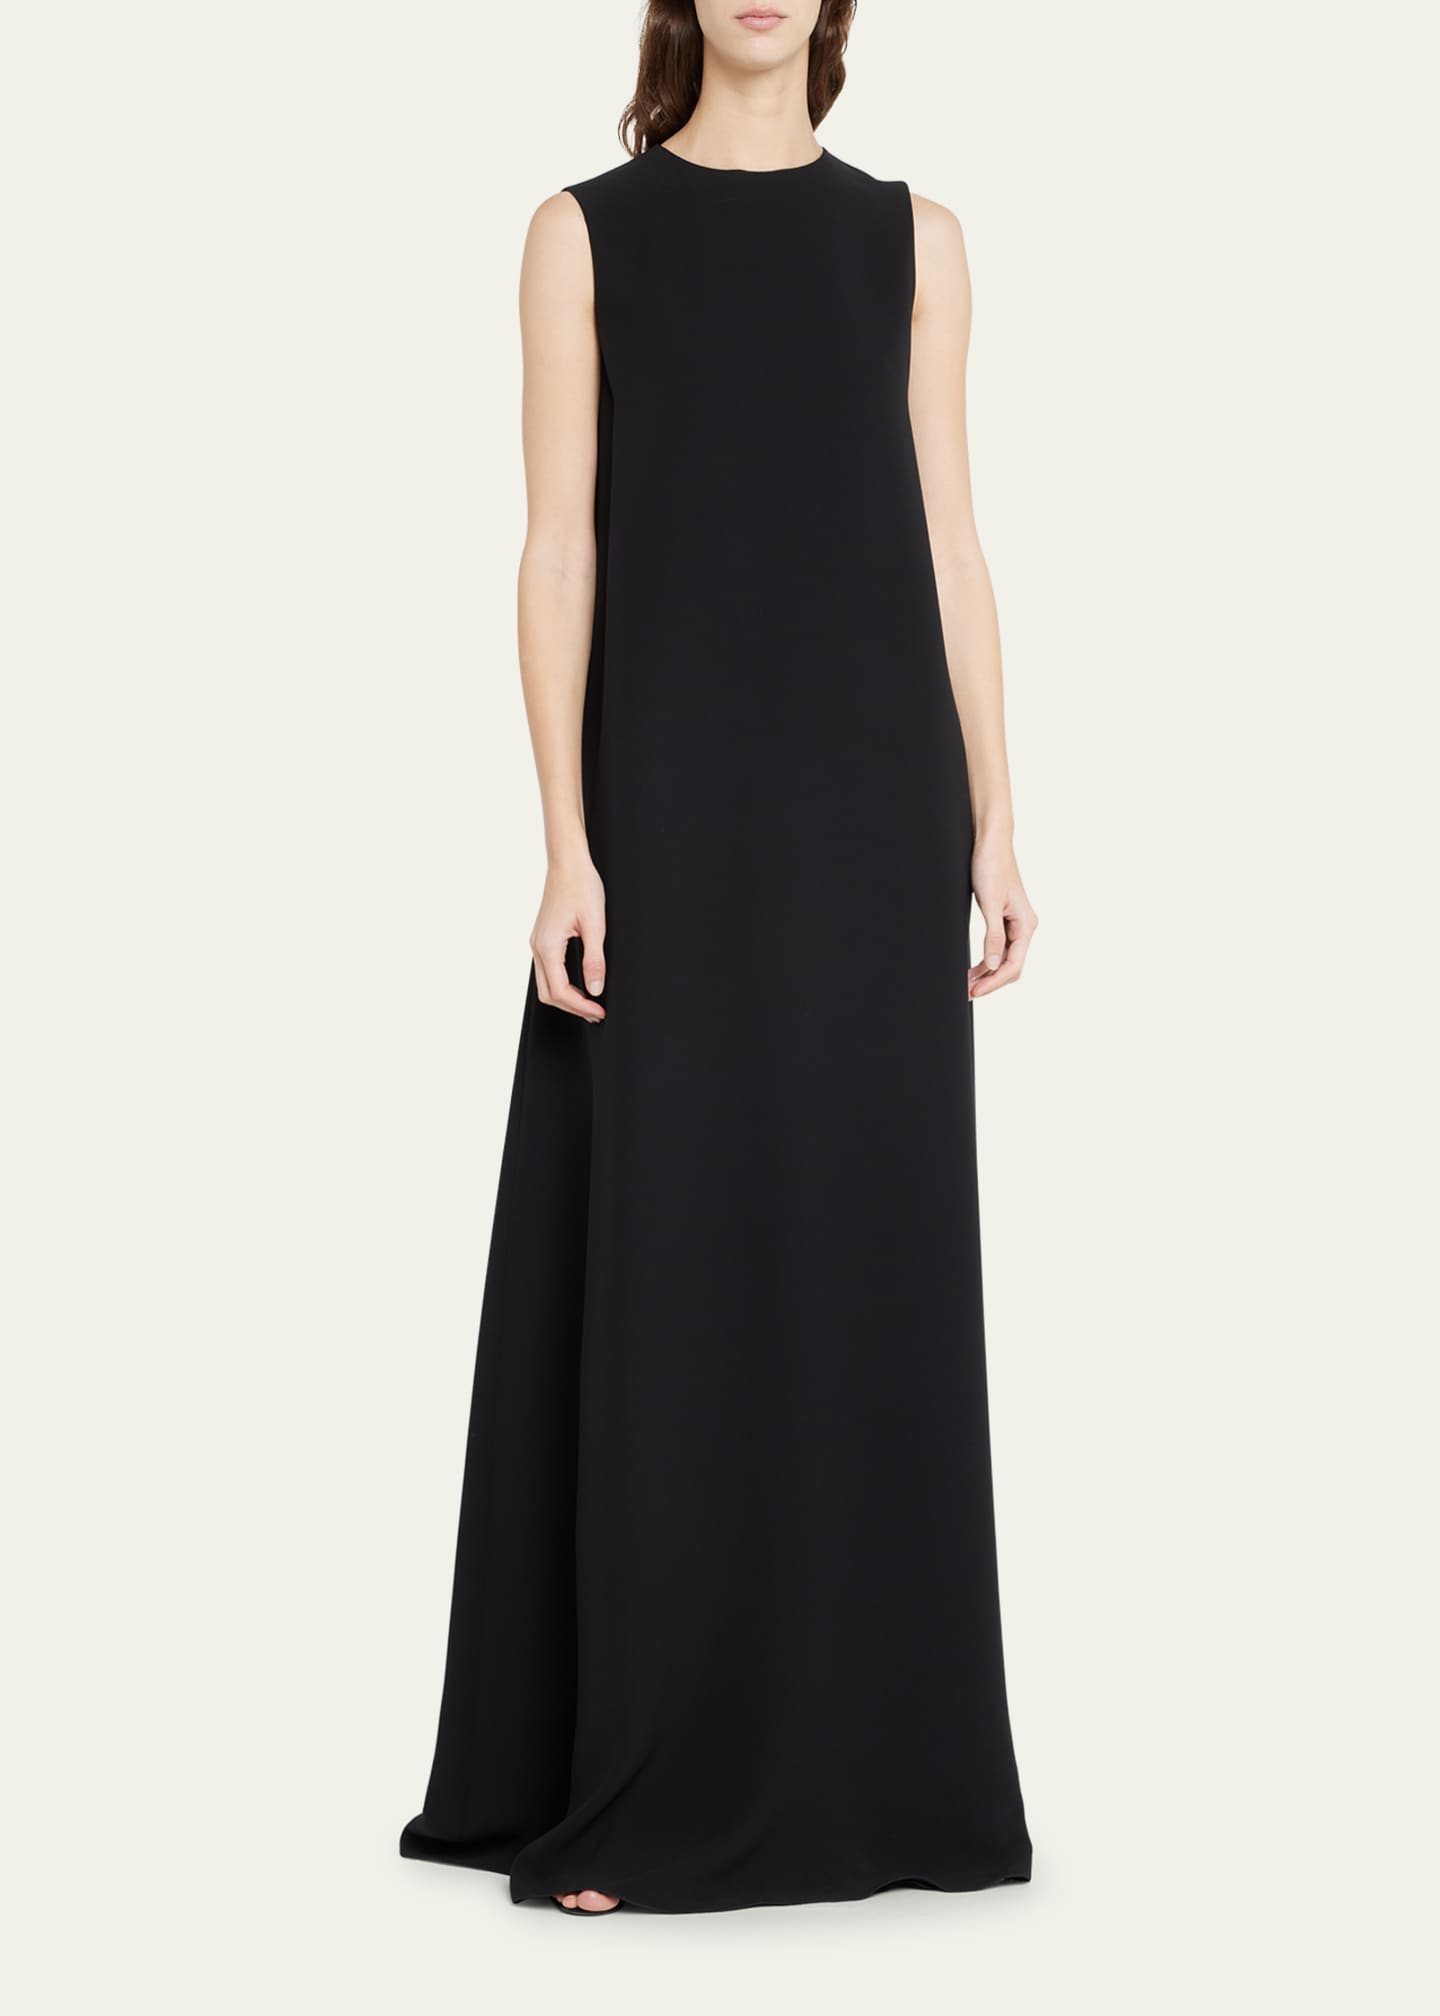 THE ROW Calanthe Wool Gown with Cape Back - Bergdorf Goodman